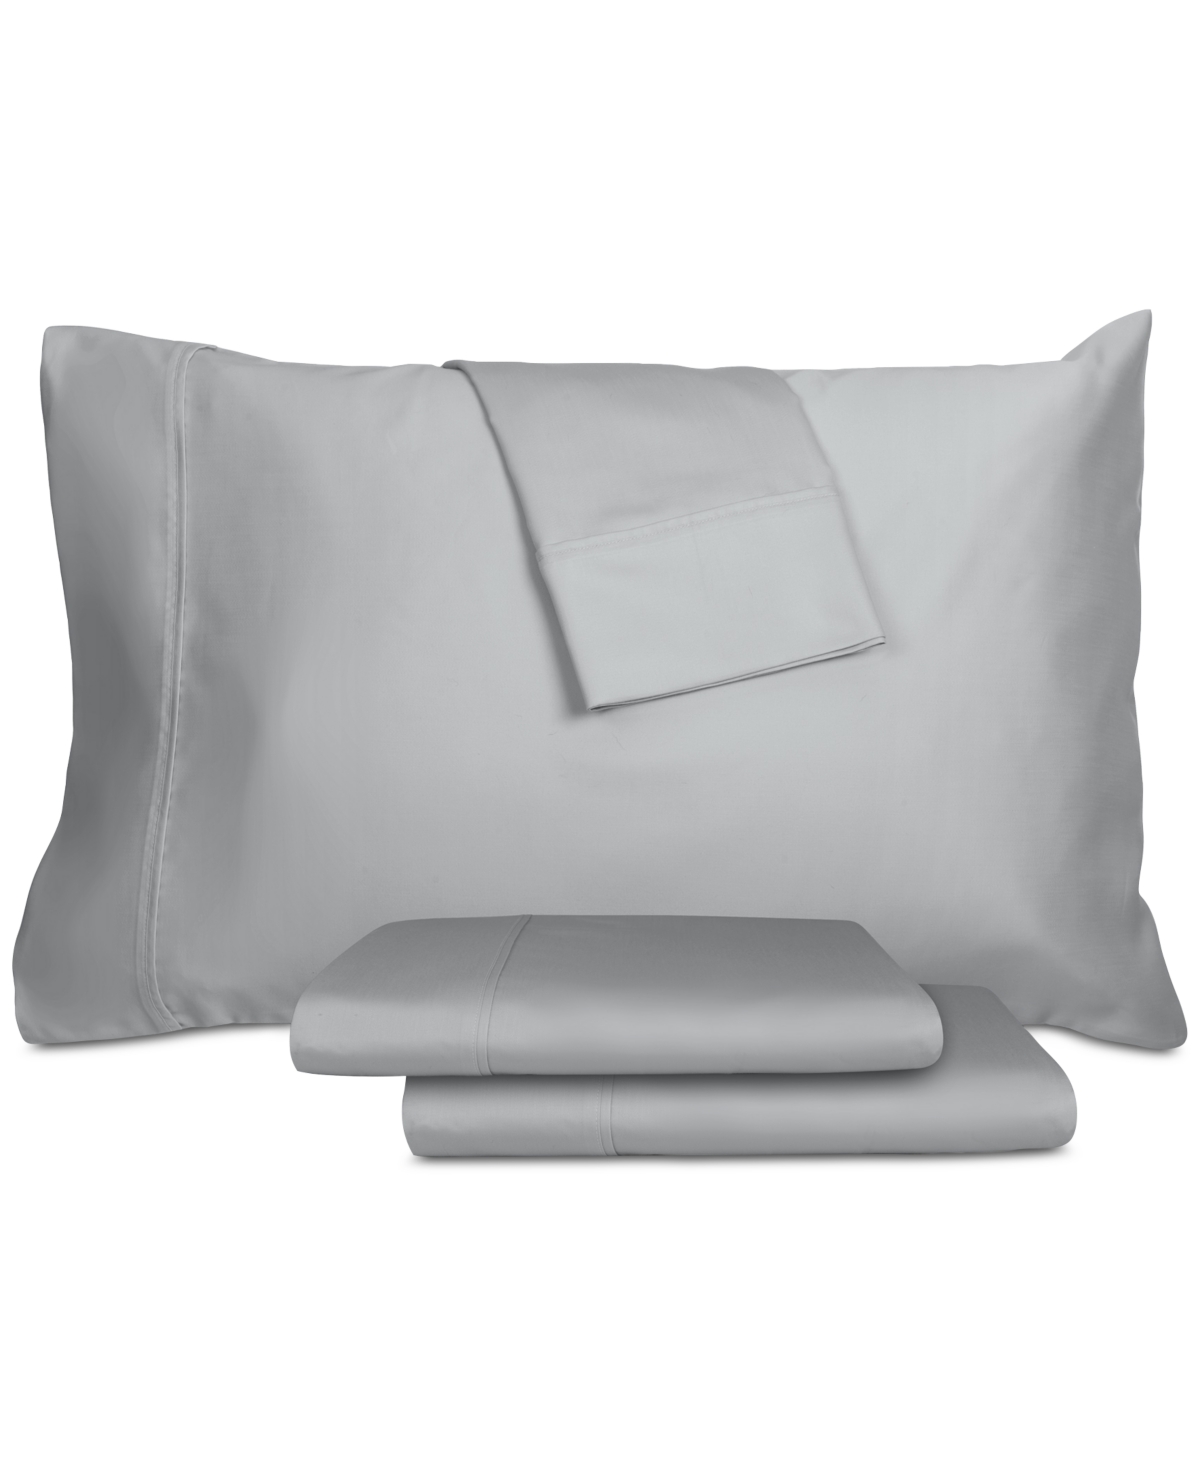 Aq Textiles Percale Solid 4-pc. Sheet Set, King In Grey